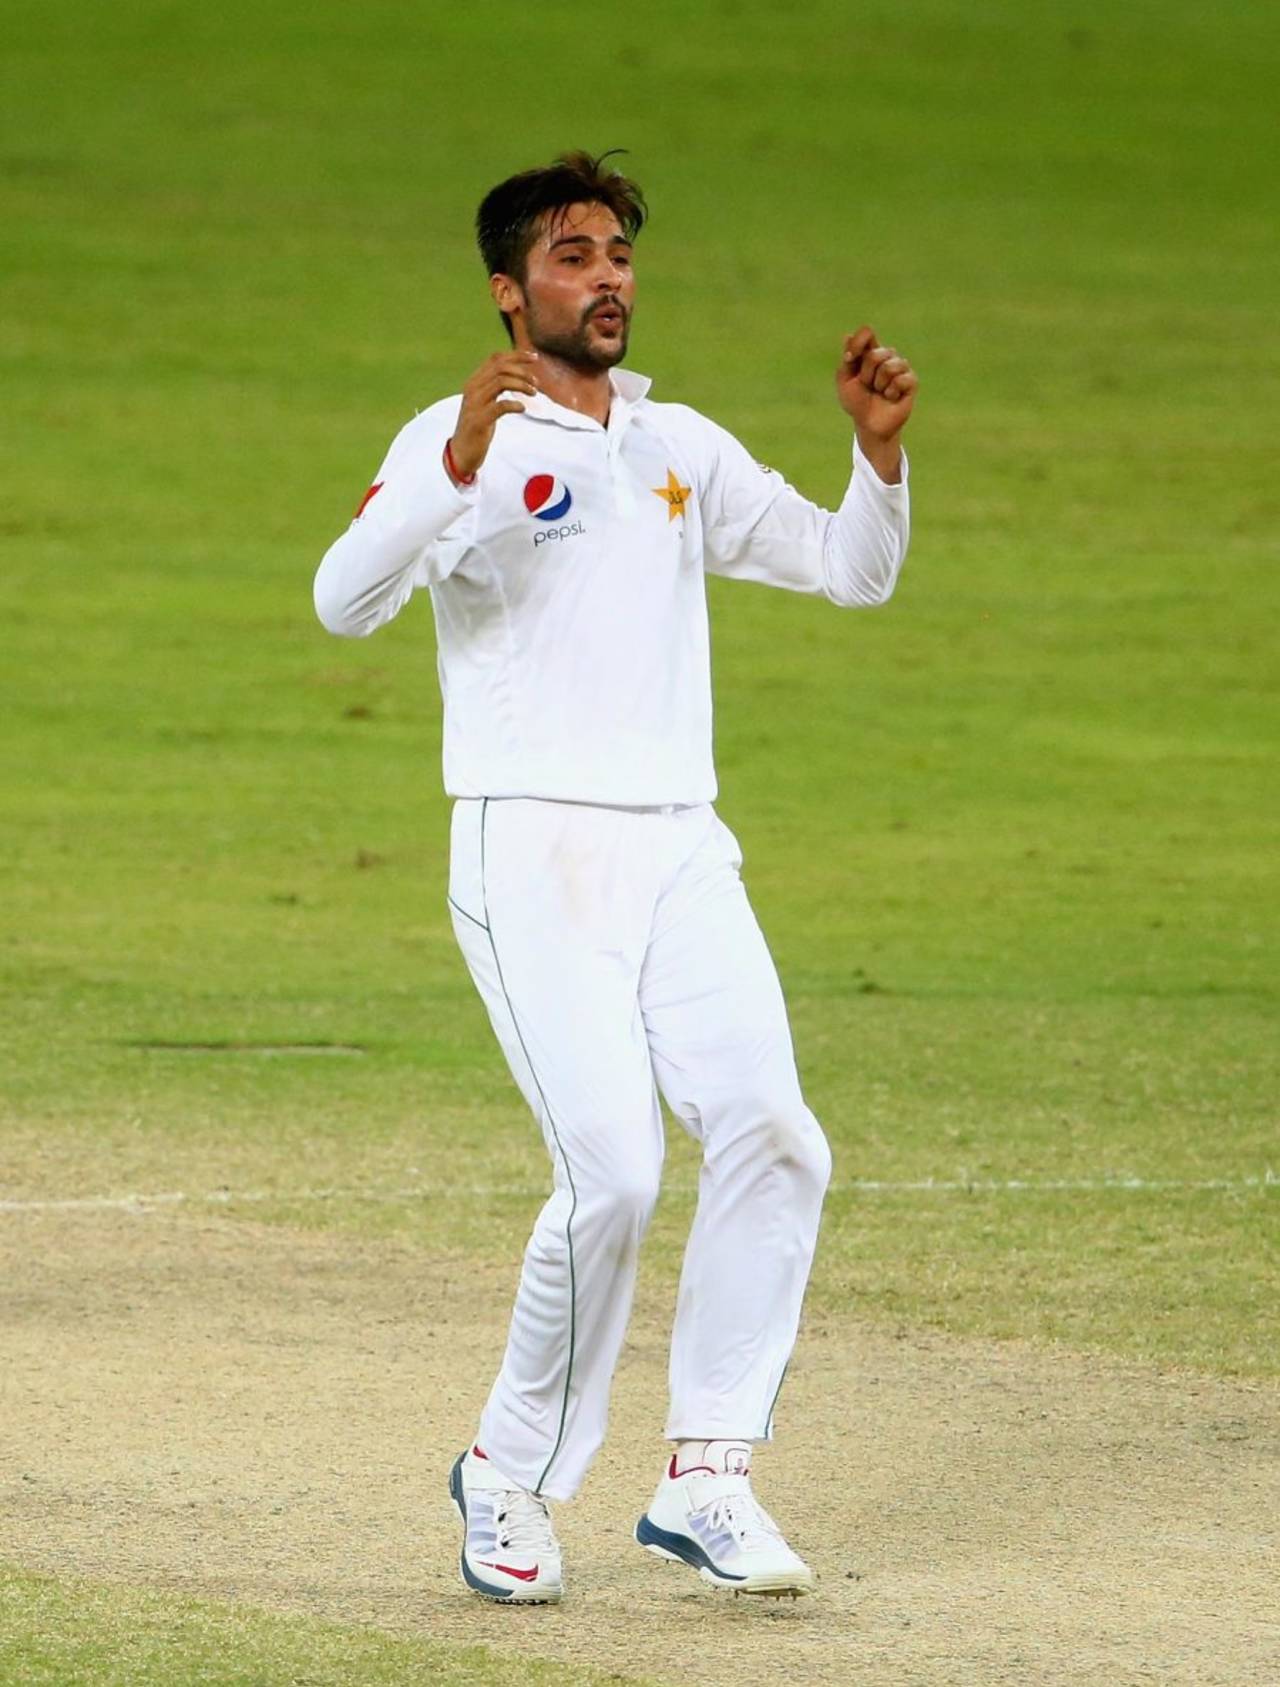 Mohammad Amir reacts after a delivery, Pakistan v West Indies, 1st Test, Dubai, 4th day, October 16, 2016